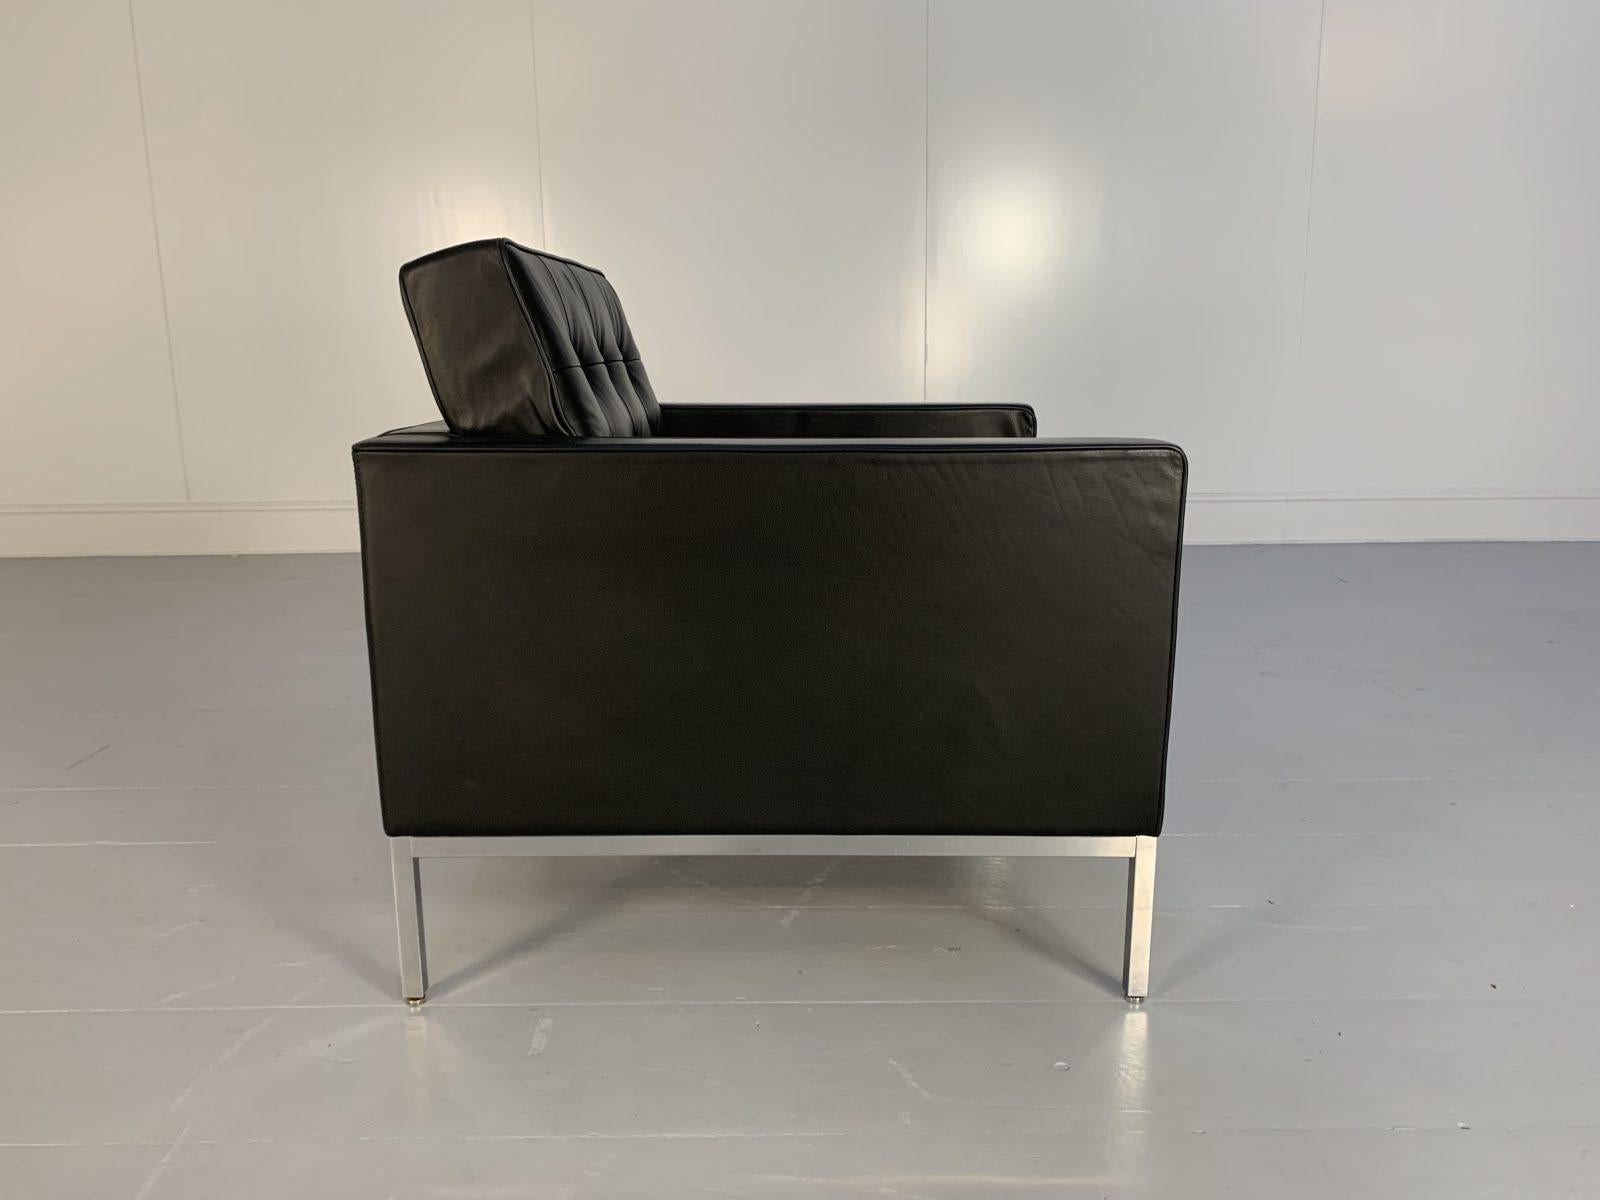 Knoll Studio “Florence Knoll” Lounge Chair Armchair – In Black “Volo” Leather In Good Condition For Sale In Barrowford, GB